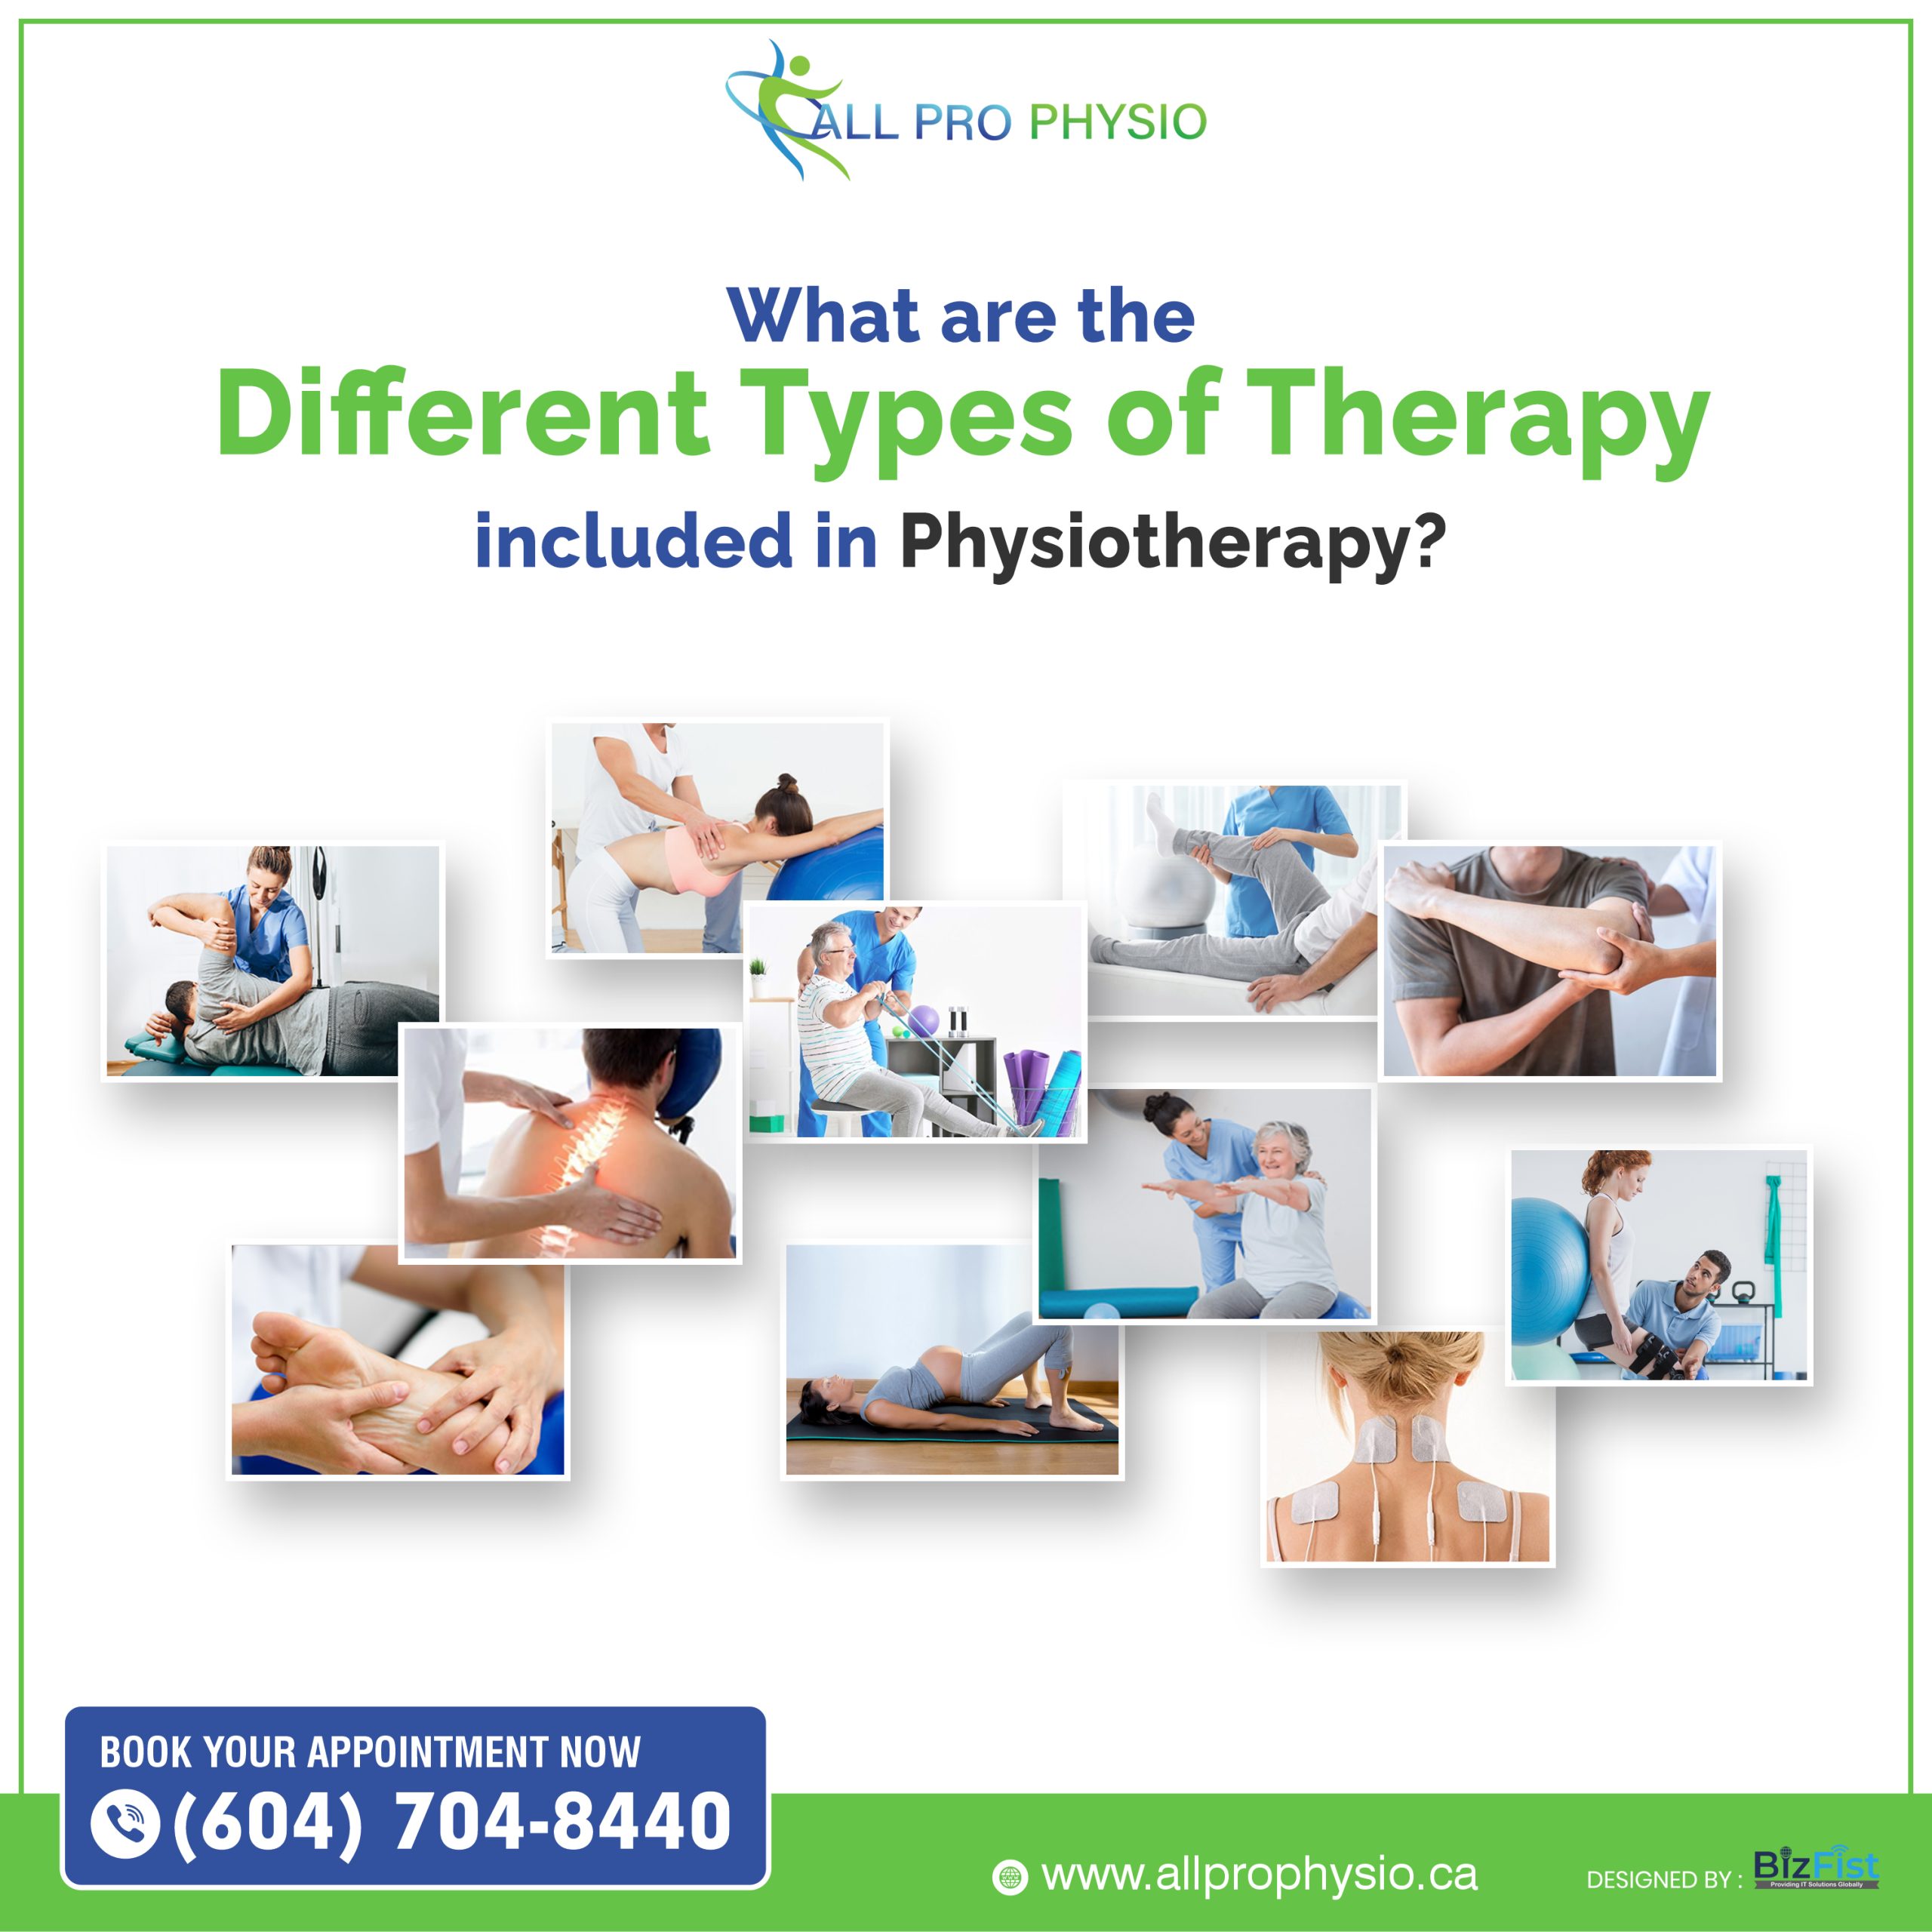 What Are The Different Types Of Therapy Included In Physiotherapy?